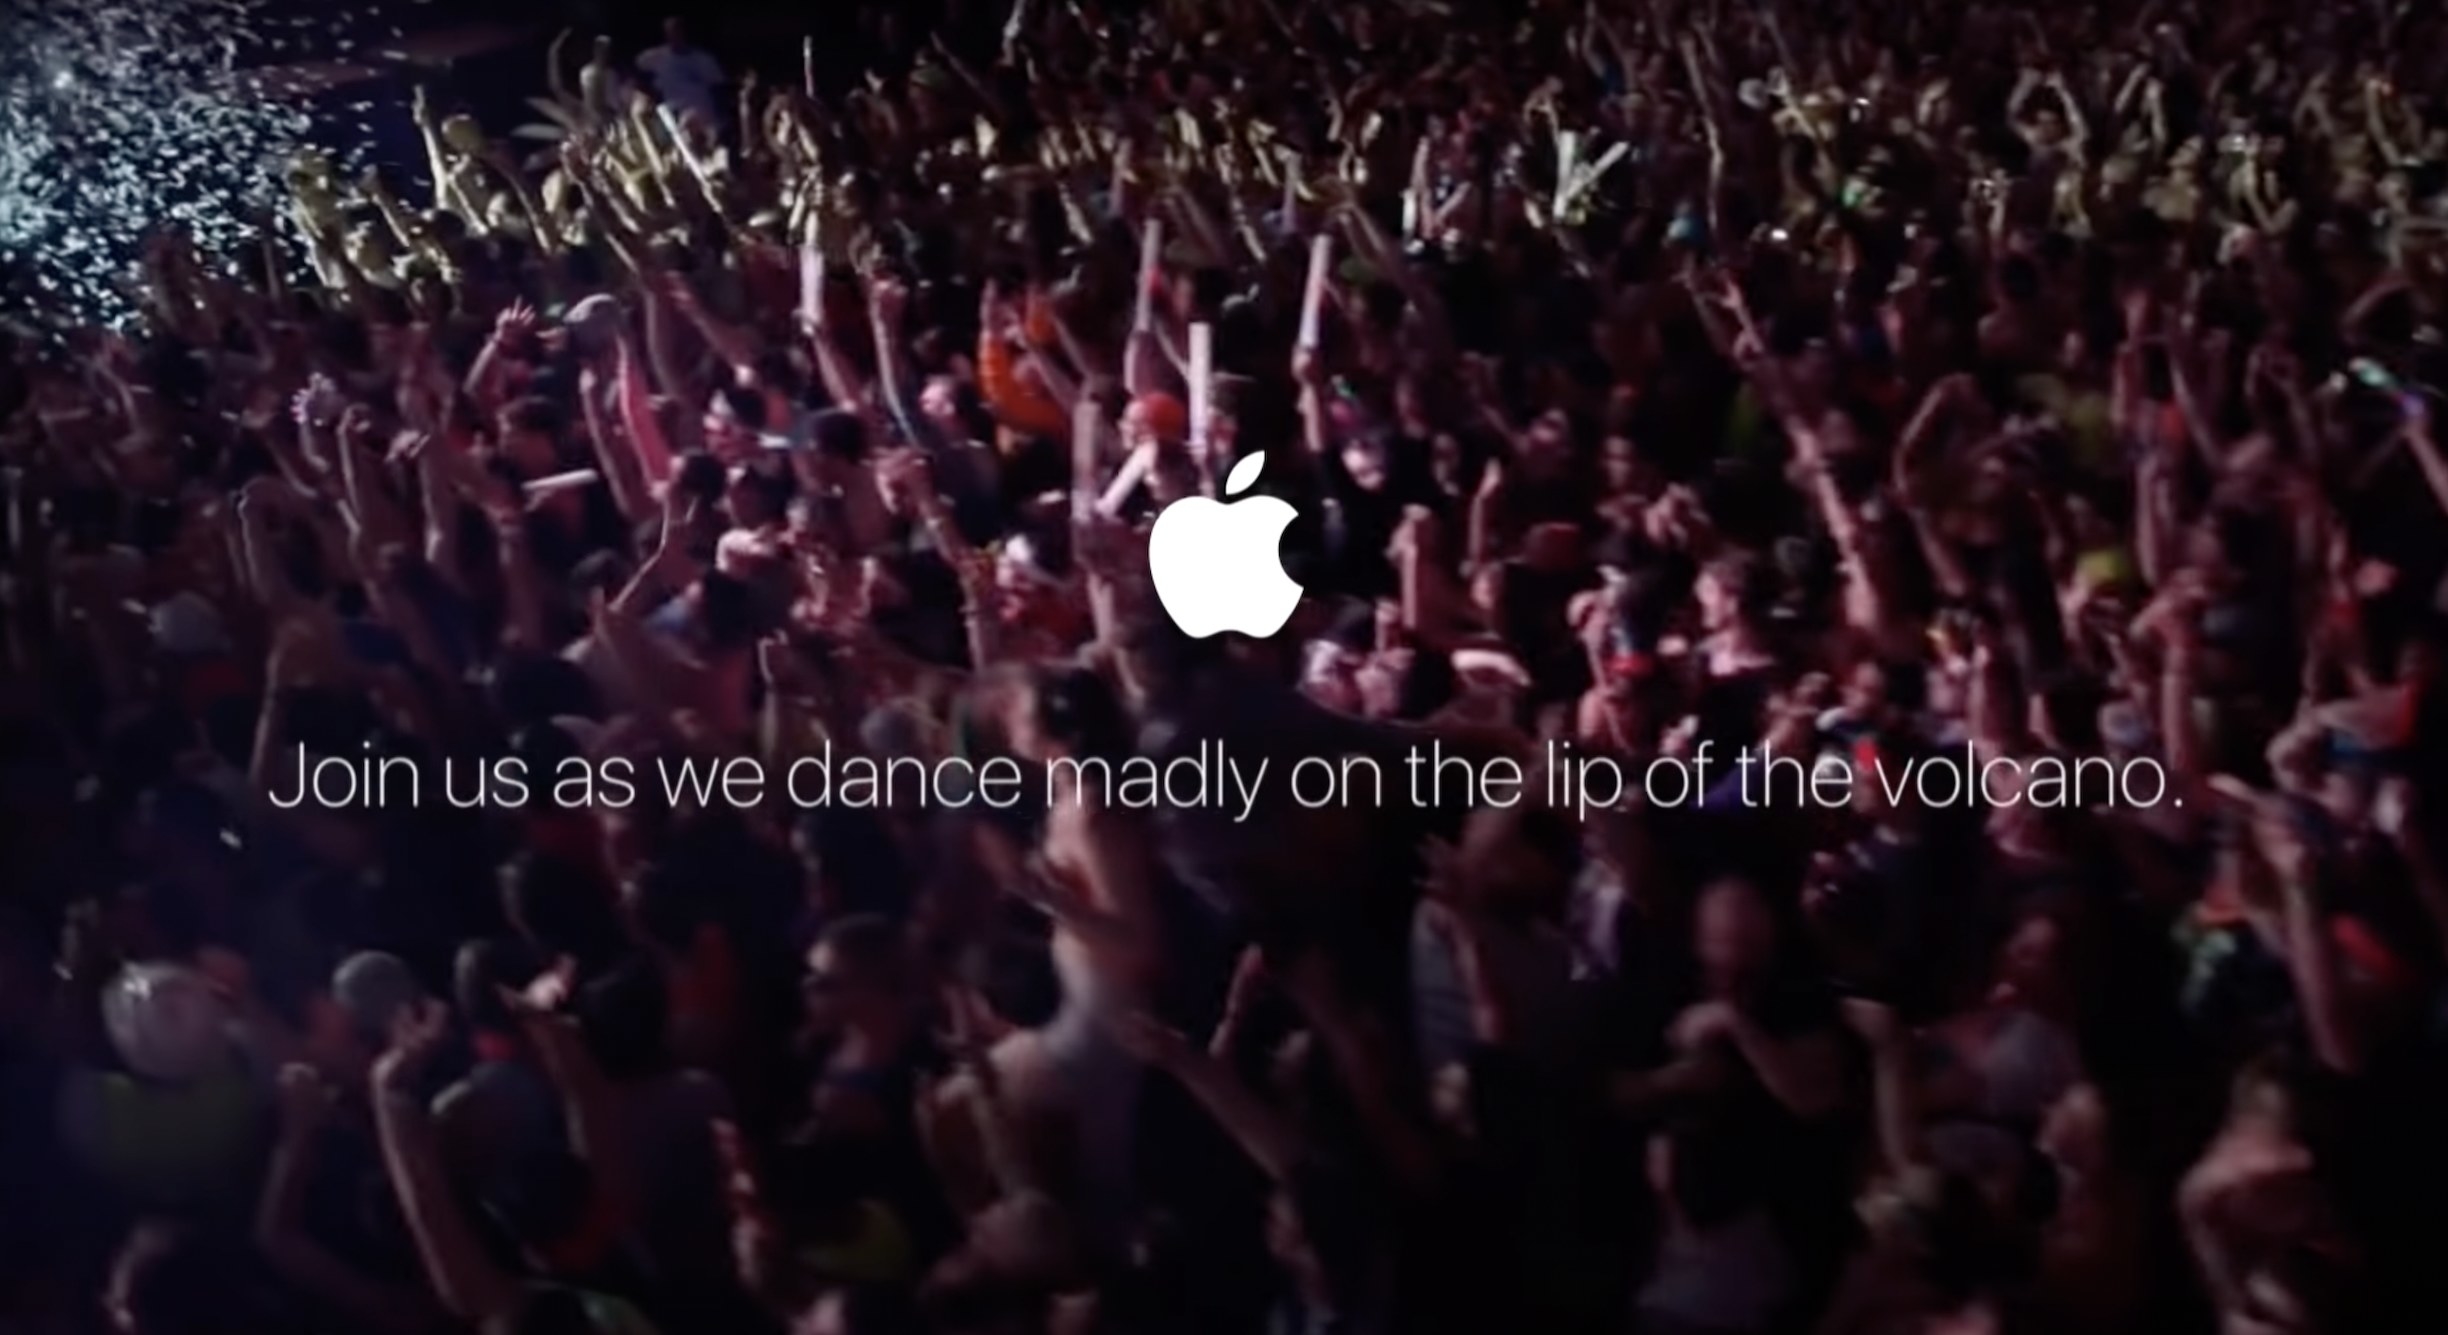 What looks like an Apple add, with an image of a crowd below the Apple logo at a slogan that says, Join us as we dance madly on the lip of the volcano